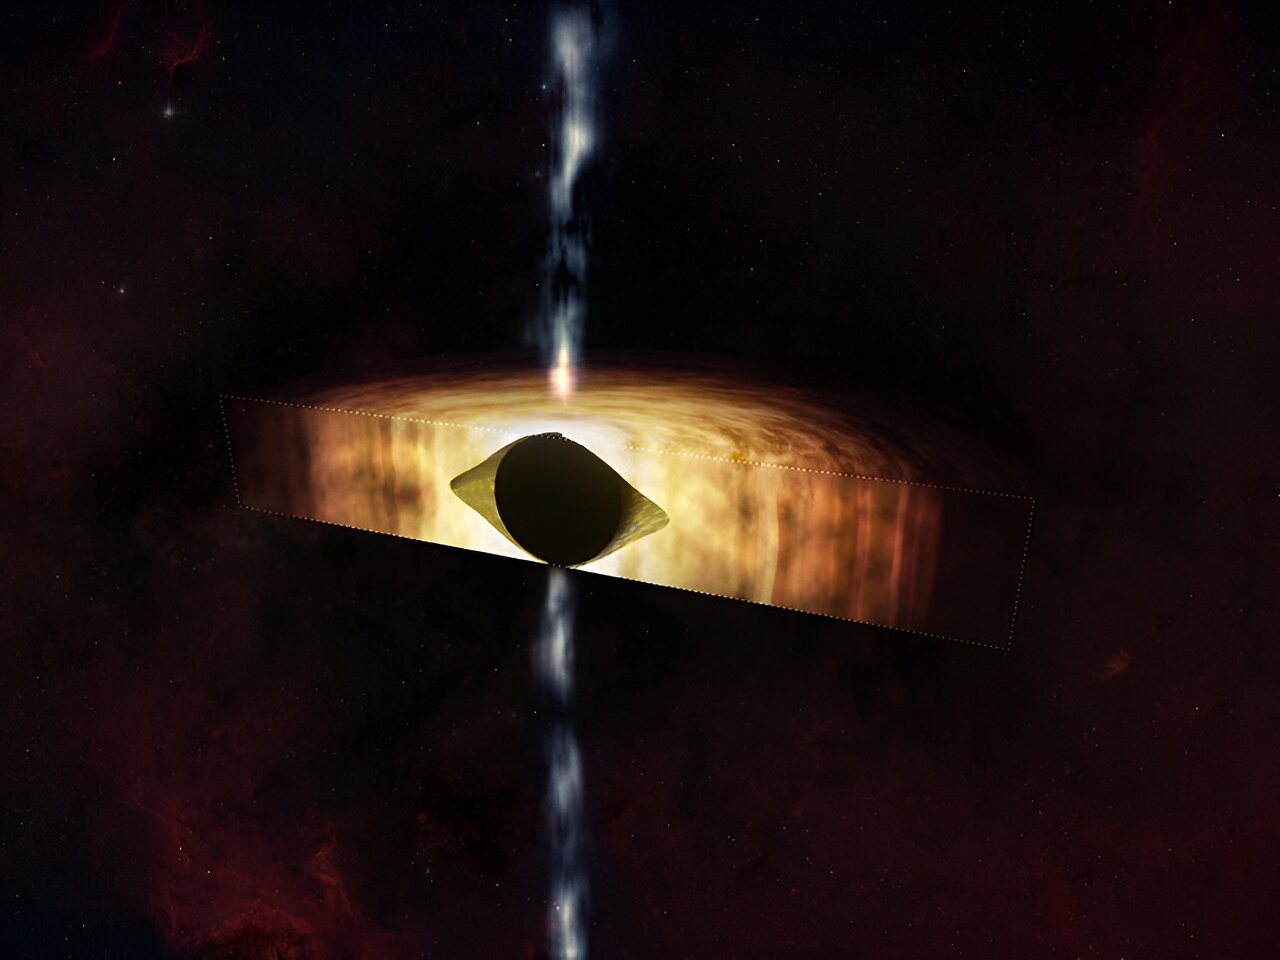 Telescopic Observations Indicate the Milky Way’s Black Hole is Primed for a Forceful Push